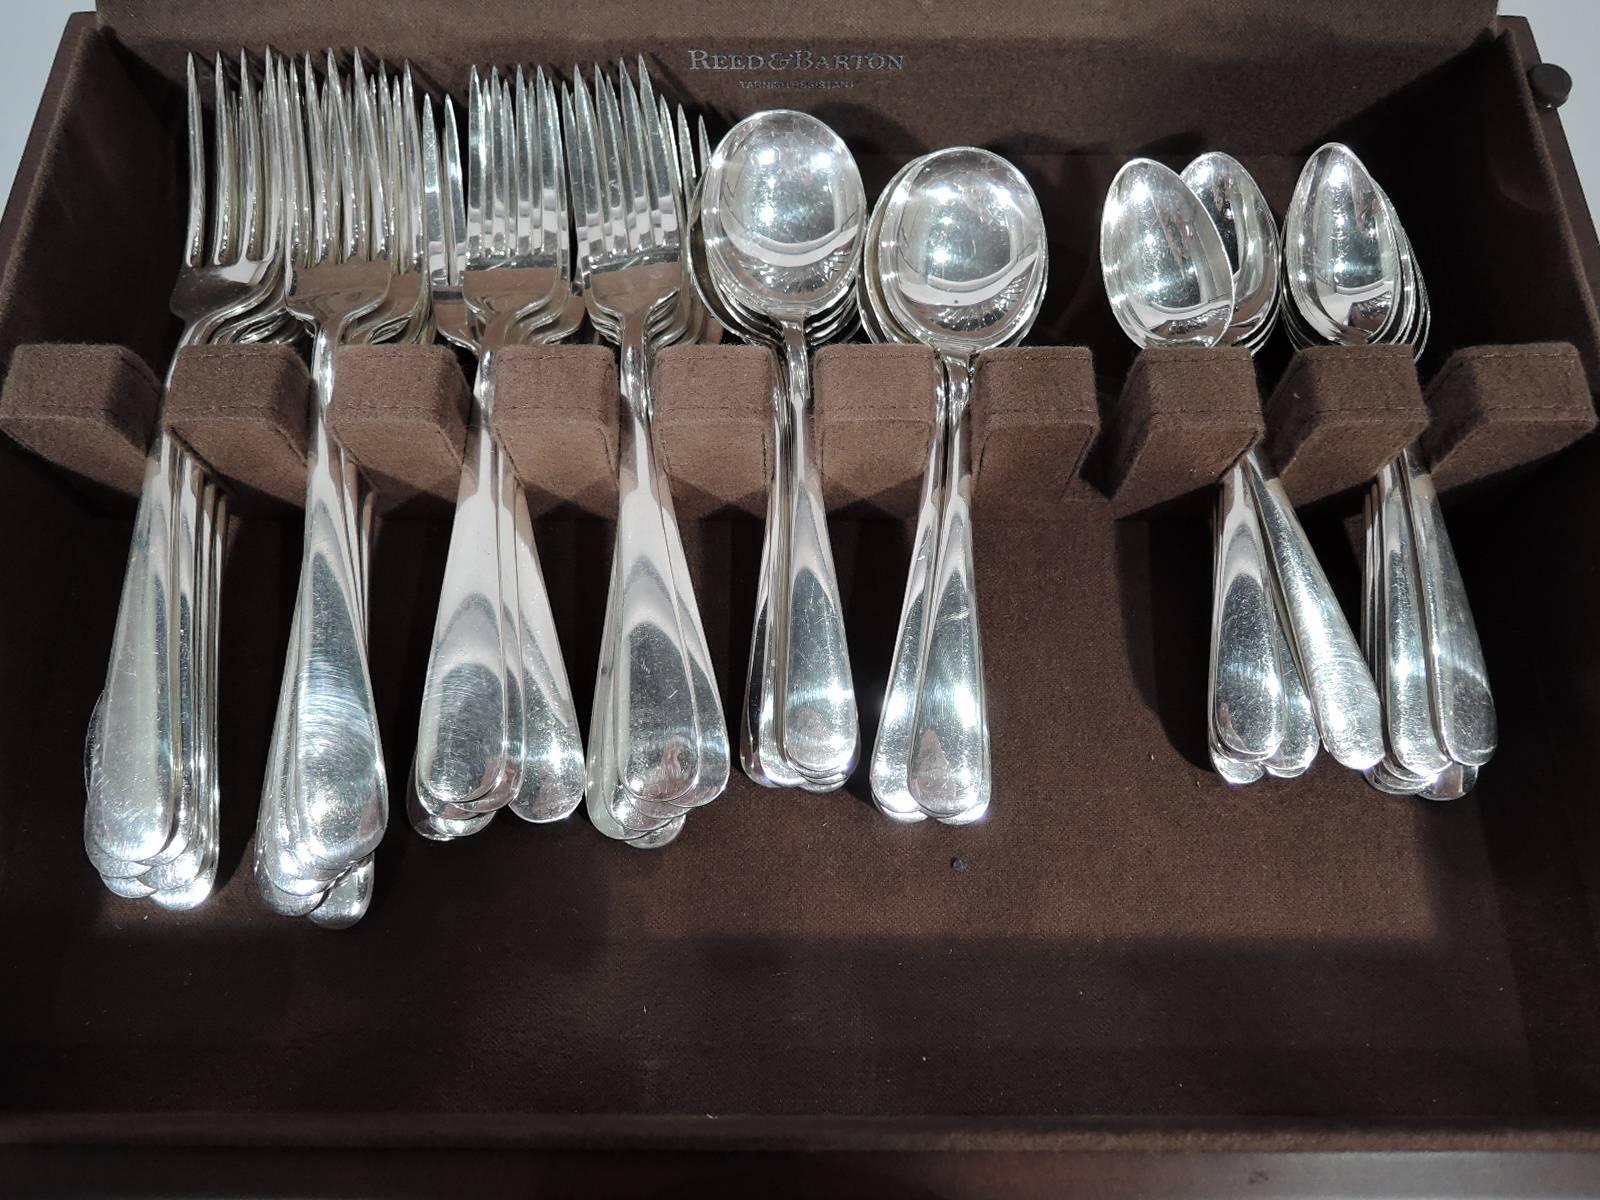 American Kirk Old Maryland Plain Sterling Silver Dinner Service with 72 Pieces